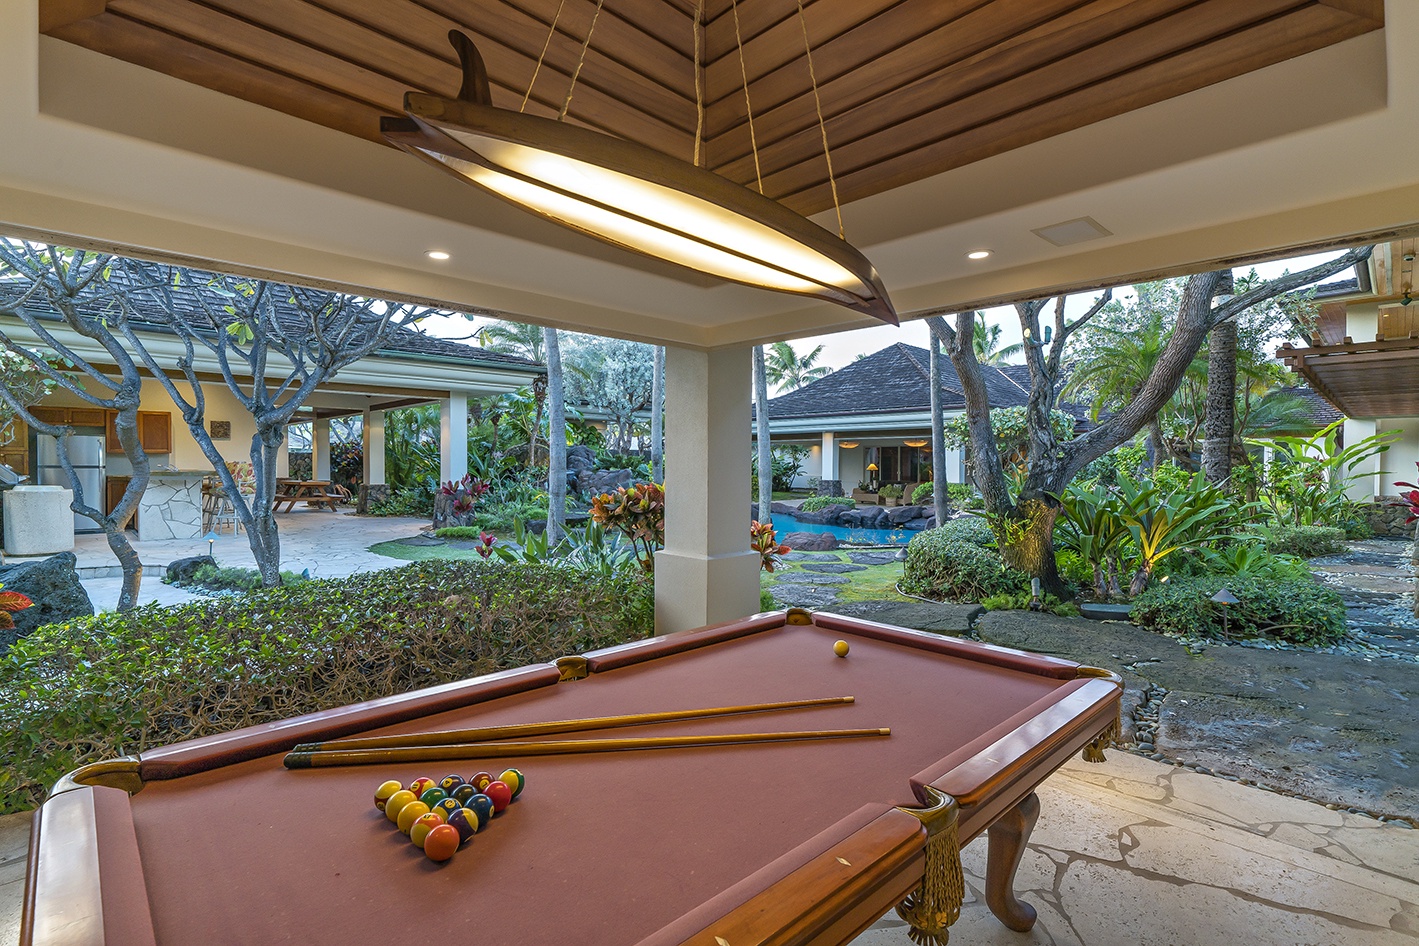 Kailua Vacation Rentals, Kailua's Kai Moena Estate - Guest house: Billiard room with slider doors to fully open to the inside courtyard.